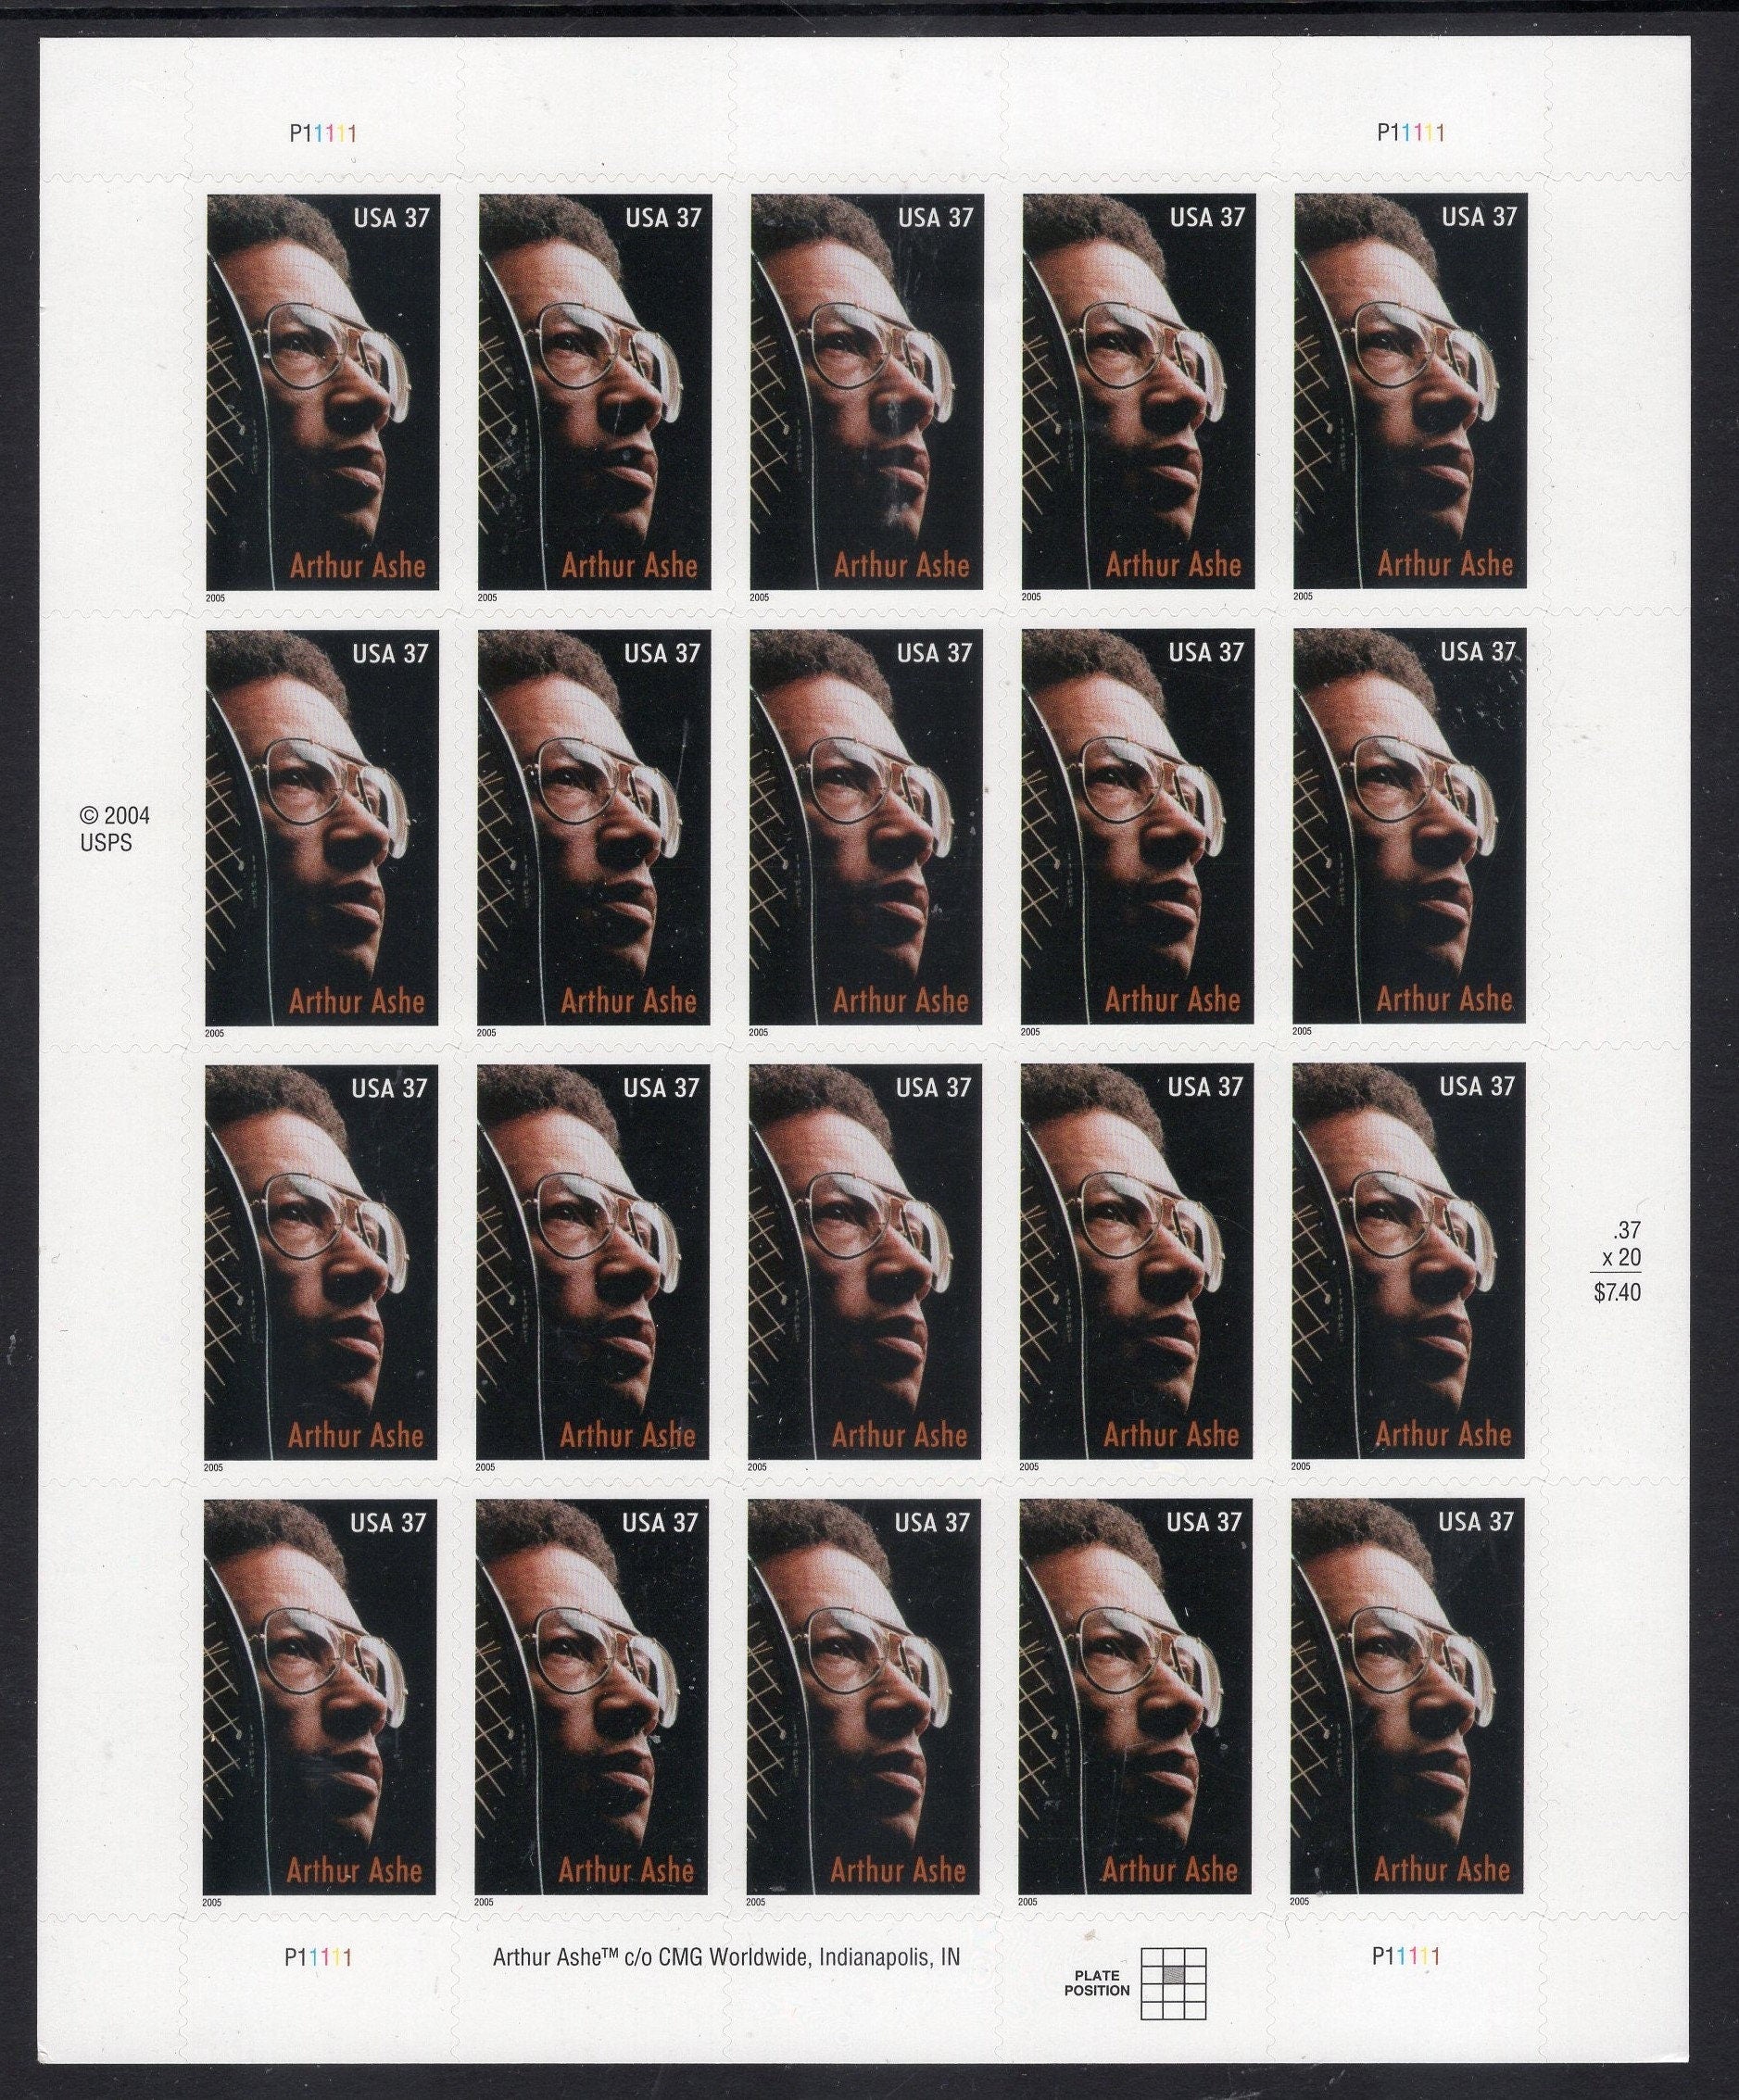 ARTHUR ASHE TENNIS Champion Sheet of 20 Black American Fresh Unused Fresh Bright USA Postage Stamps - Issued in 2005  - s3936-